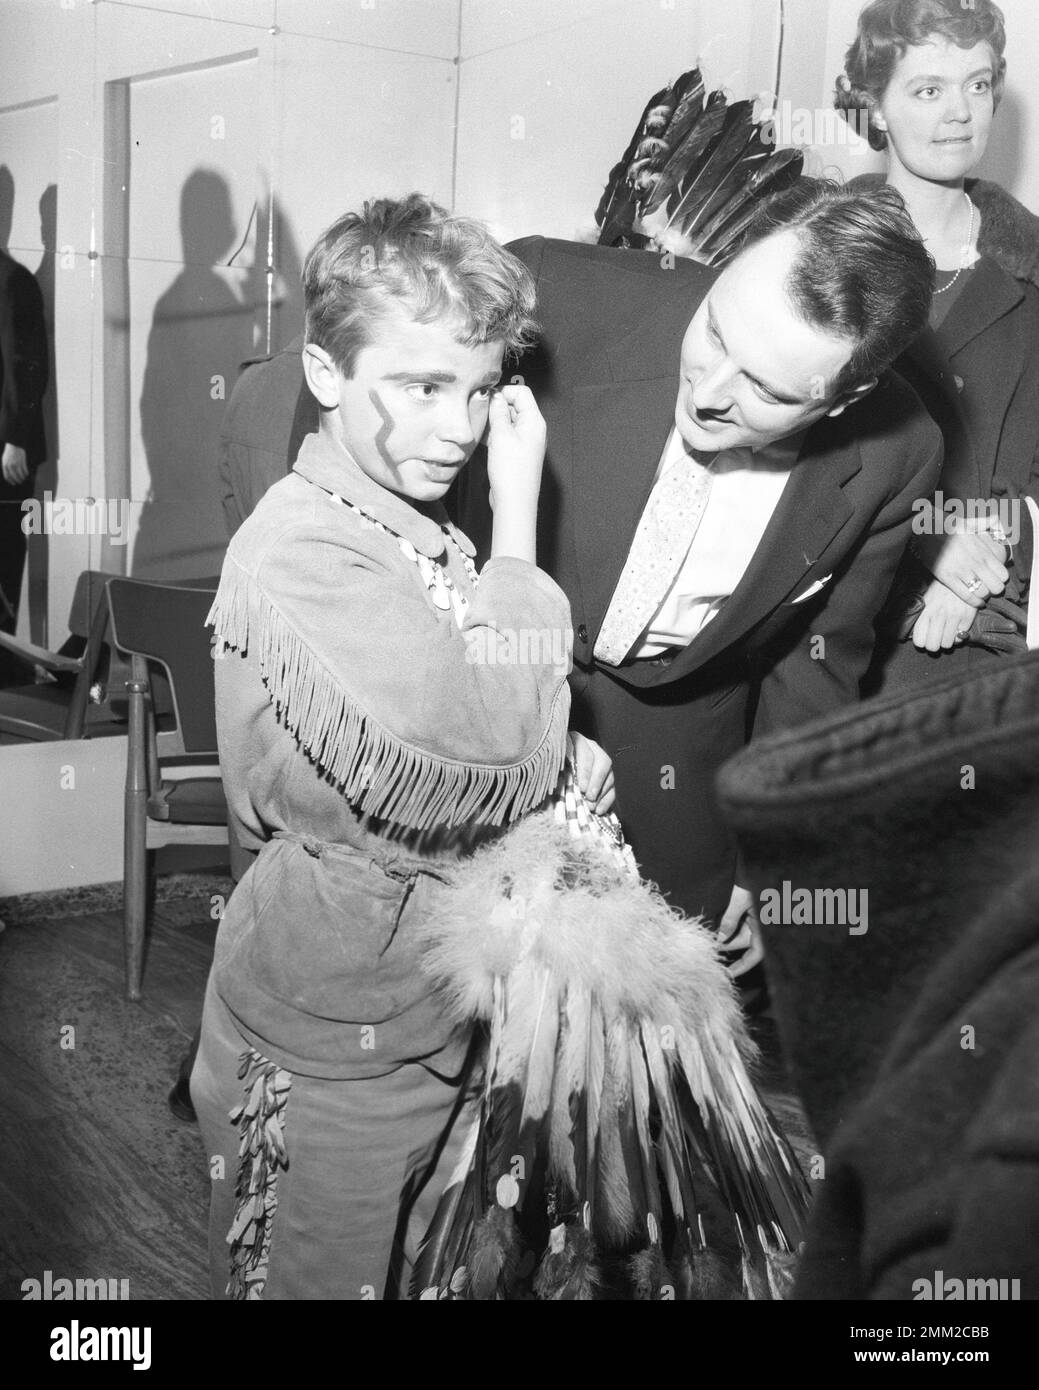 Carl XVI Gustaf, King of Sweden. Born 30 april 1946. Pictured wearing an native american costume at his school Broms 1958 at a costume party after finishing school. Stock Photo